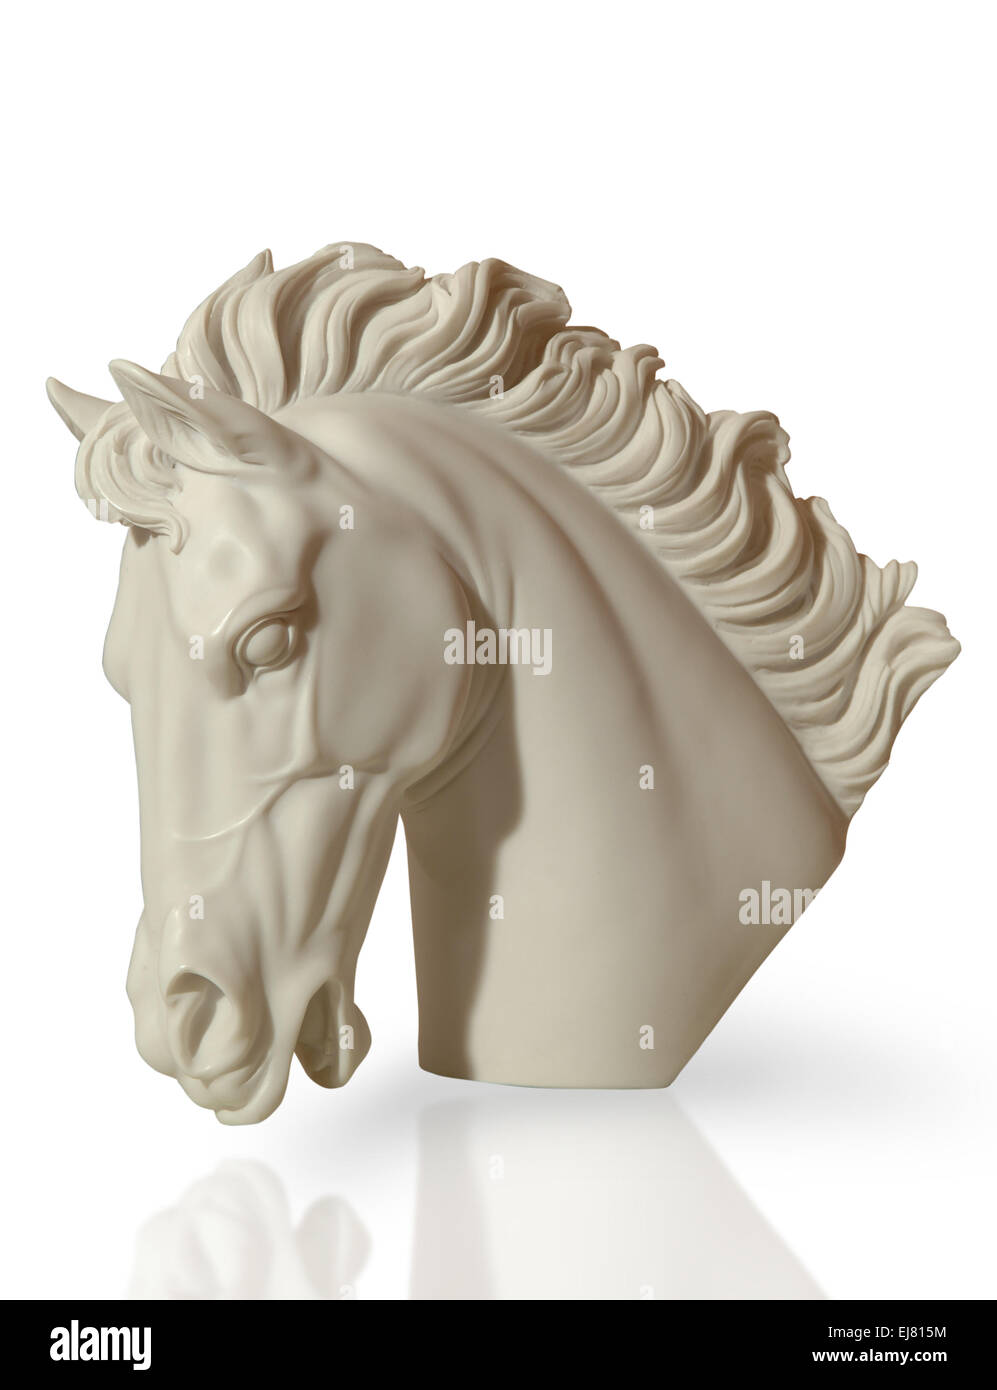 marble sculpture of a horse's head Stock Photo